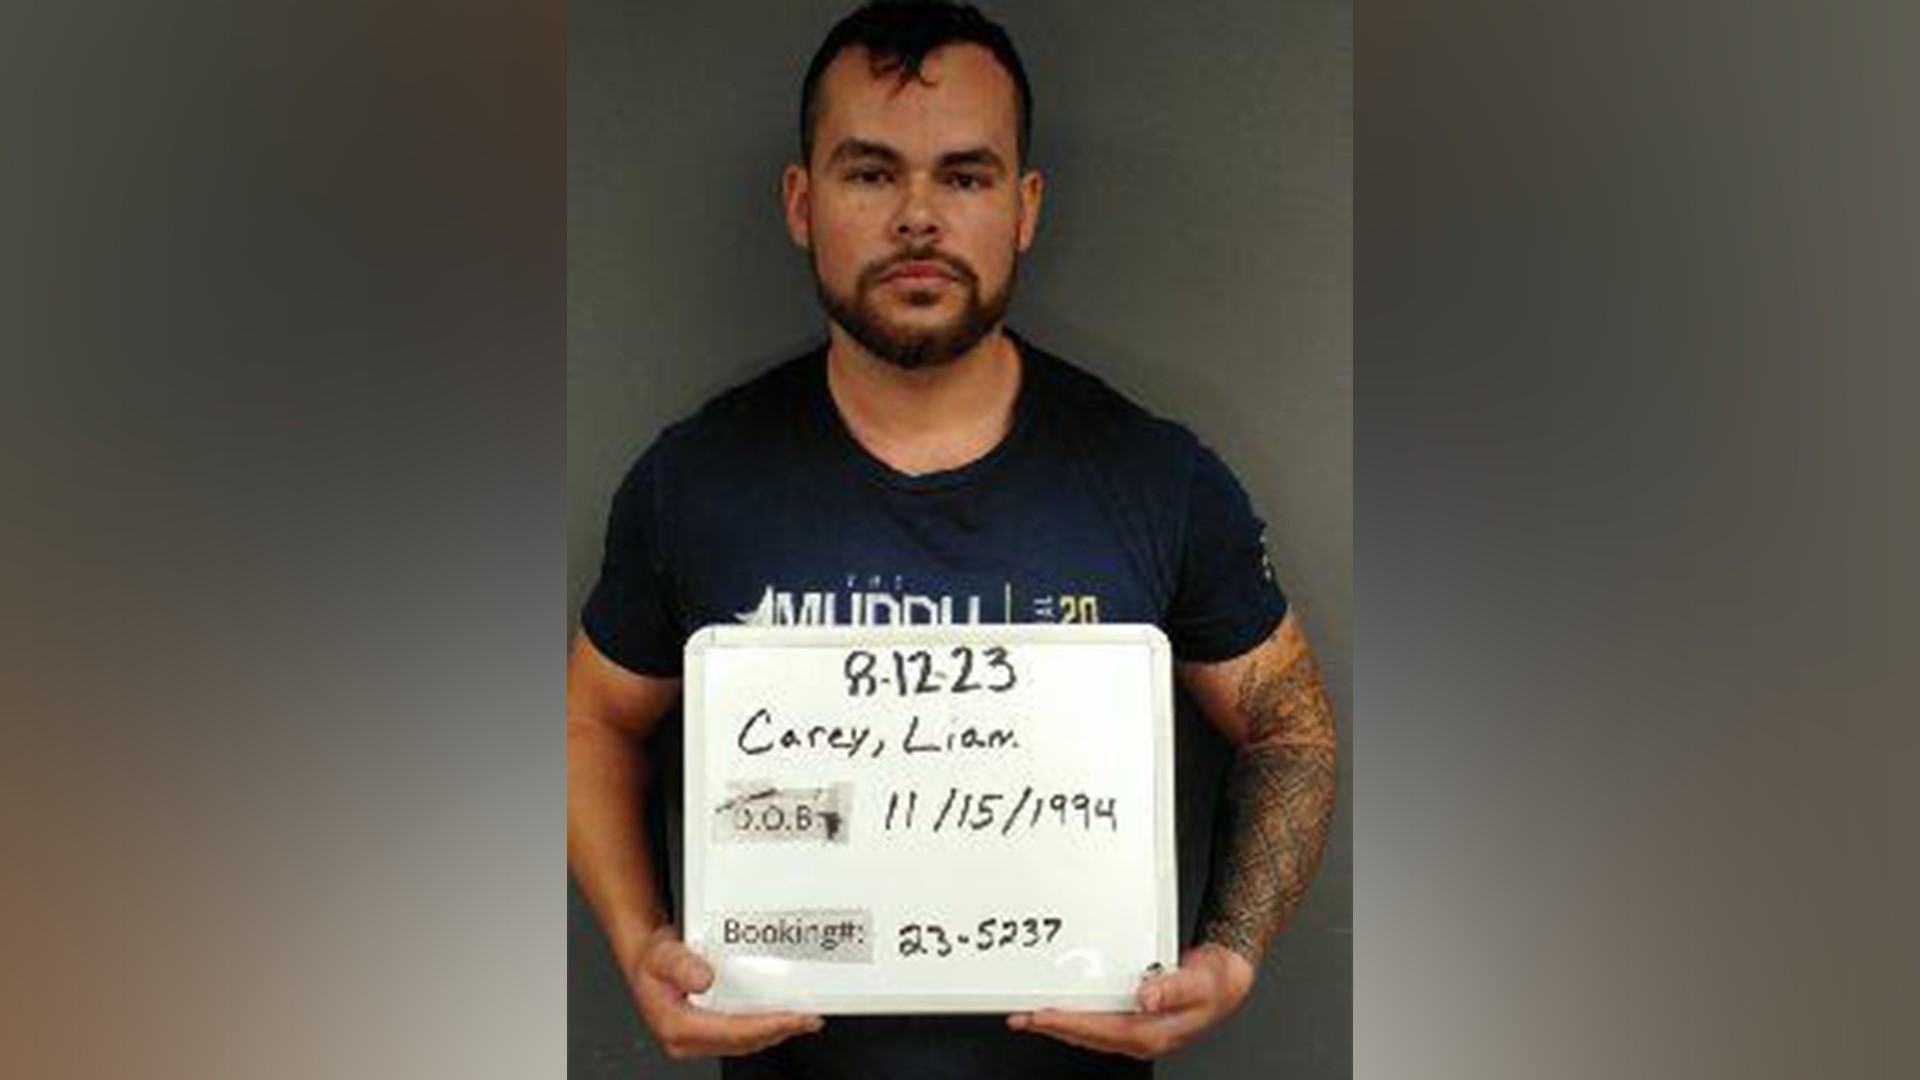 Fort Smith police arrested Liam Carey, a deputy with the Benton County Sheriff's Office, after allegedly "pulling a girl's hair and slapping another girl's face."